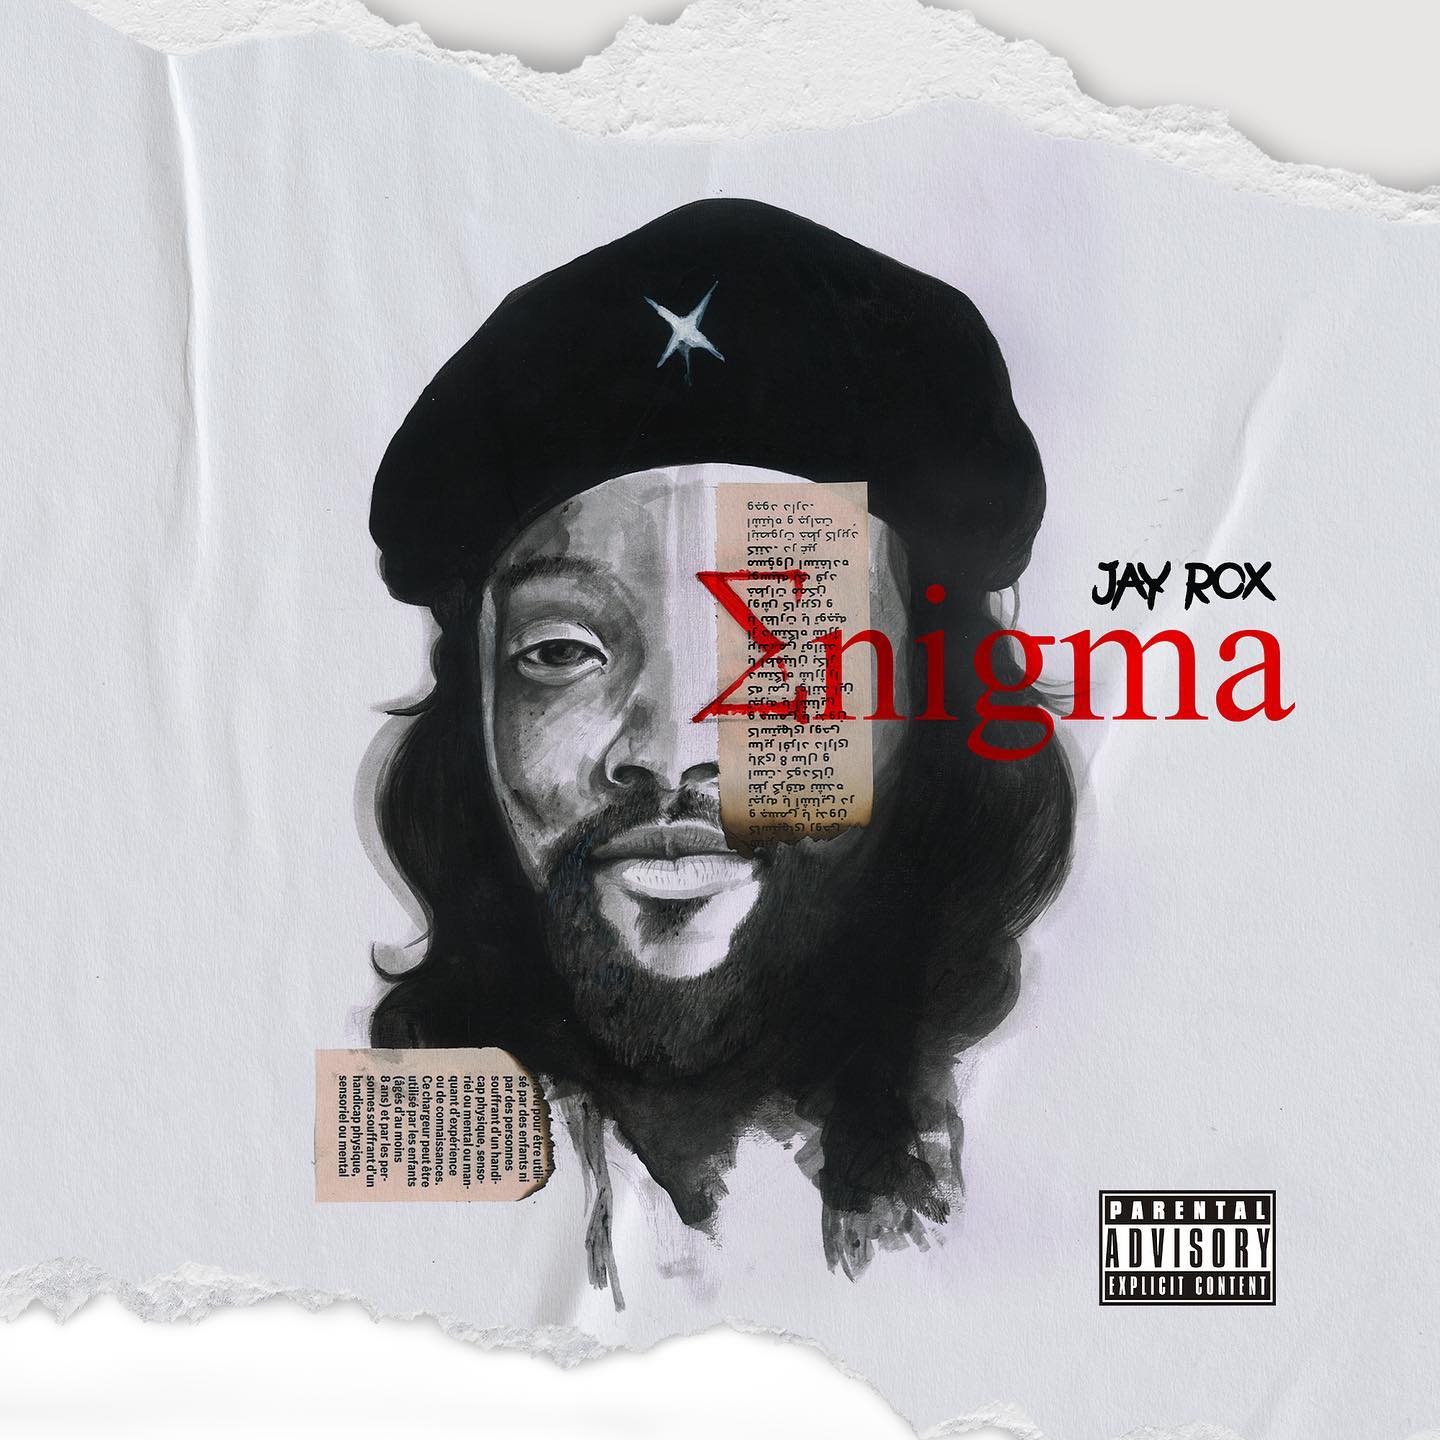 Jay Rox's New Album Enigma will feature Artists from from Zambia, Zimbabwe, Tanzania, Kenya & it will change the narrative about who he is.